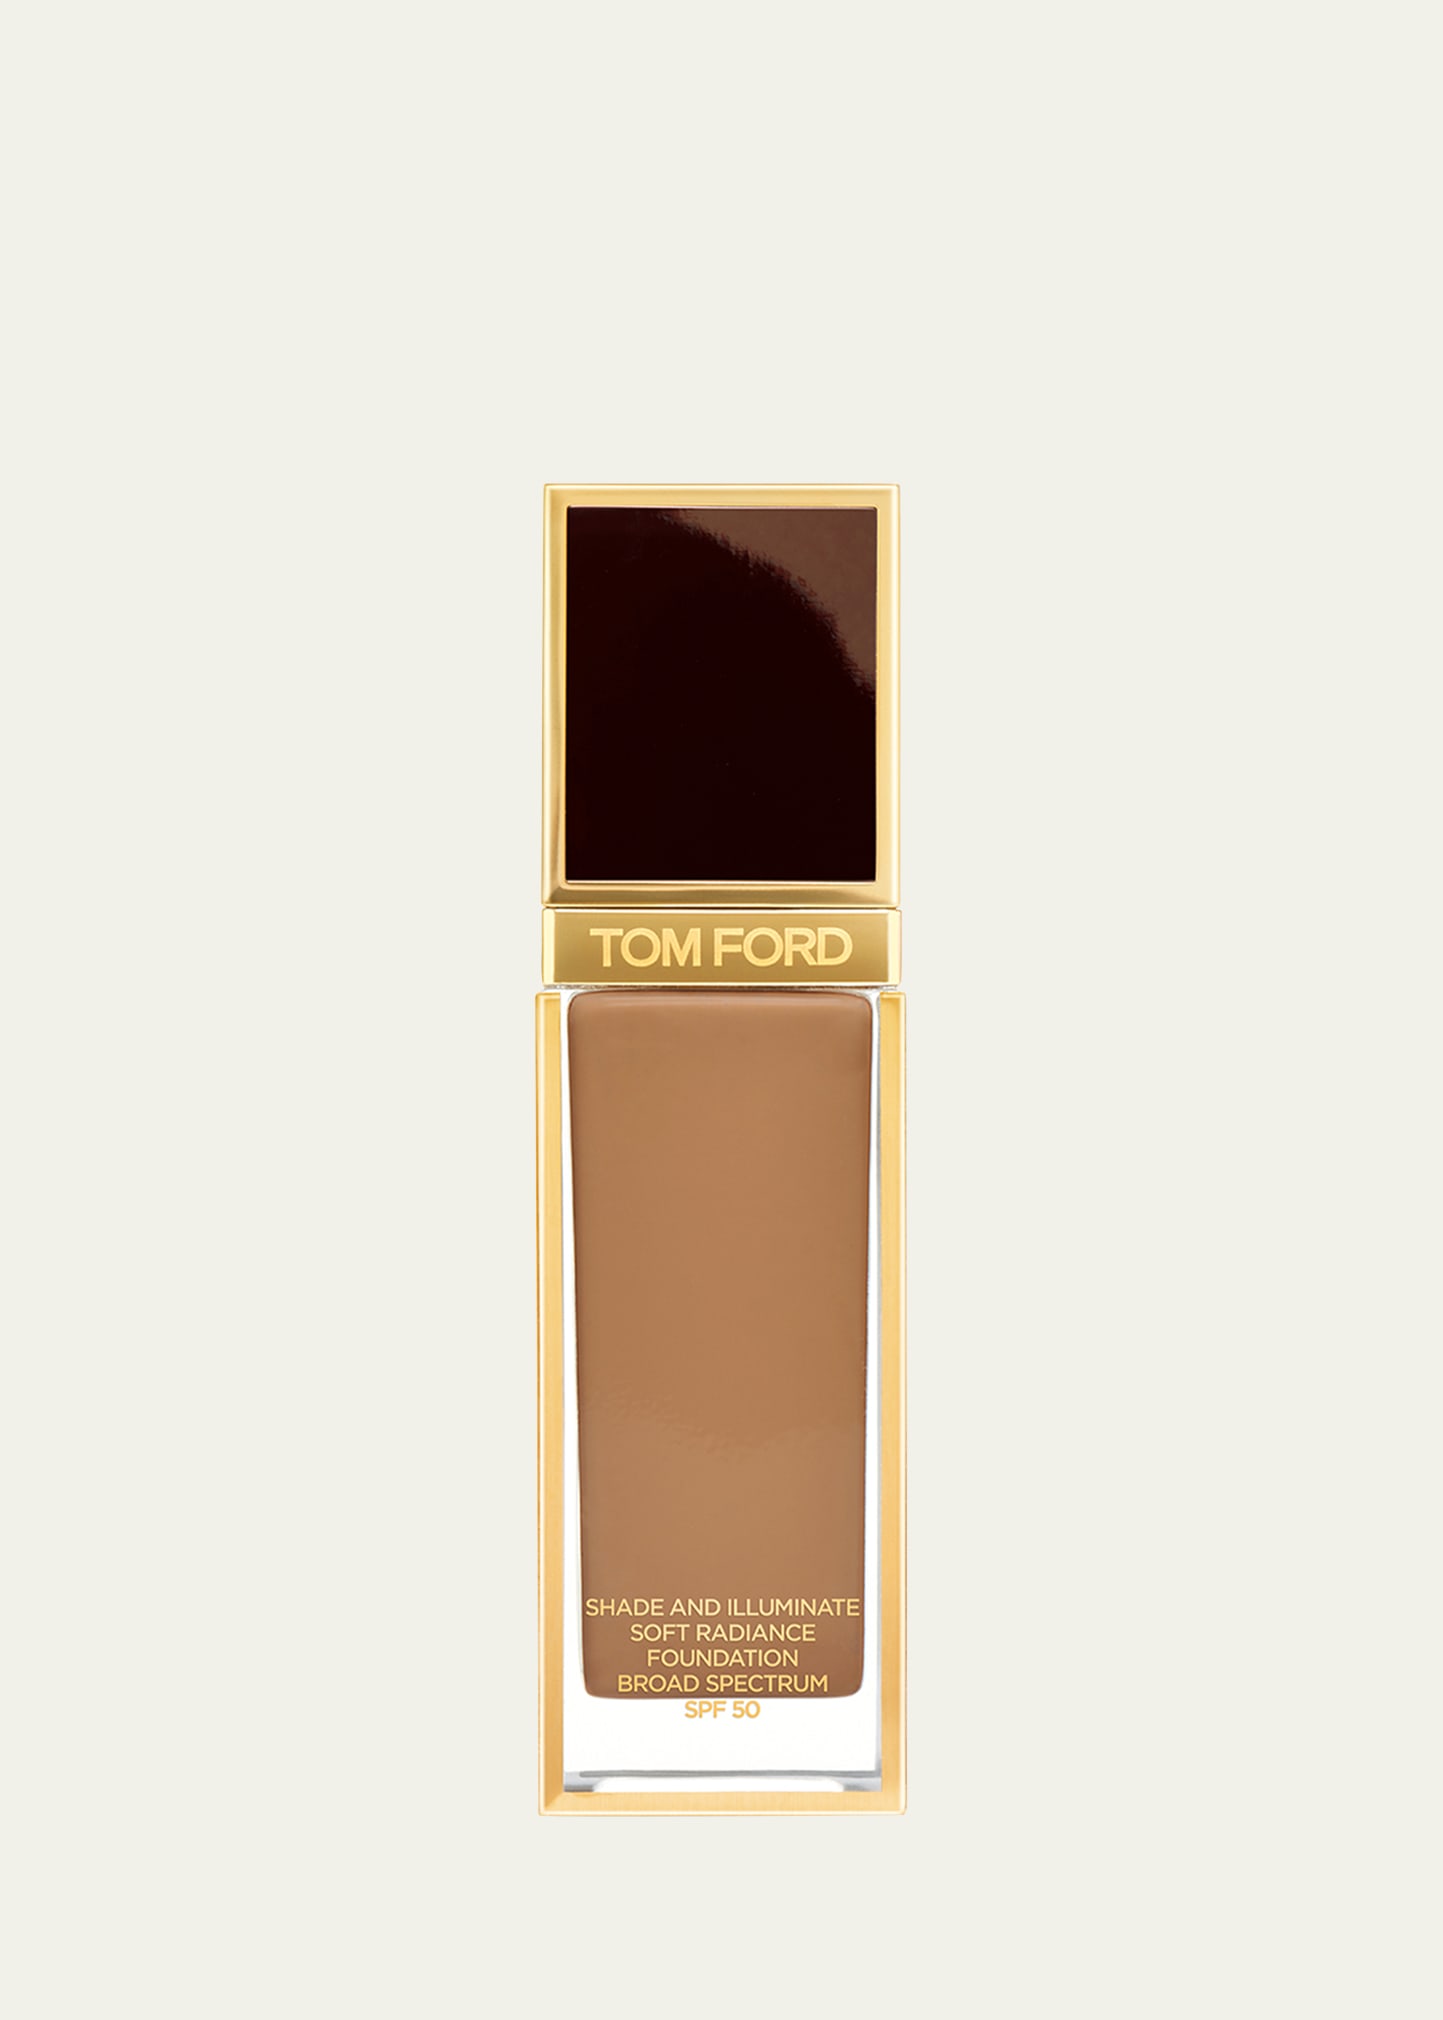 Tom Ford 1 Oz. Shade And Illuminate Soft Radiance Foundation Spf 50 In 10.7 Amber